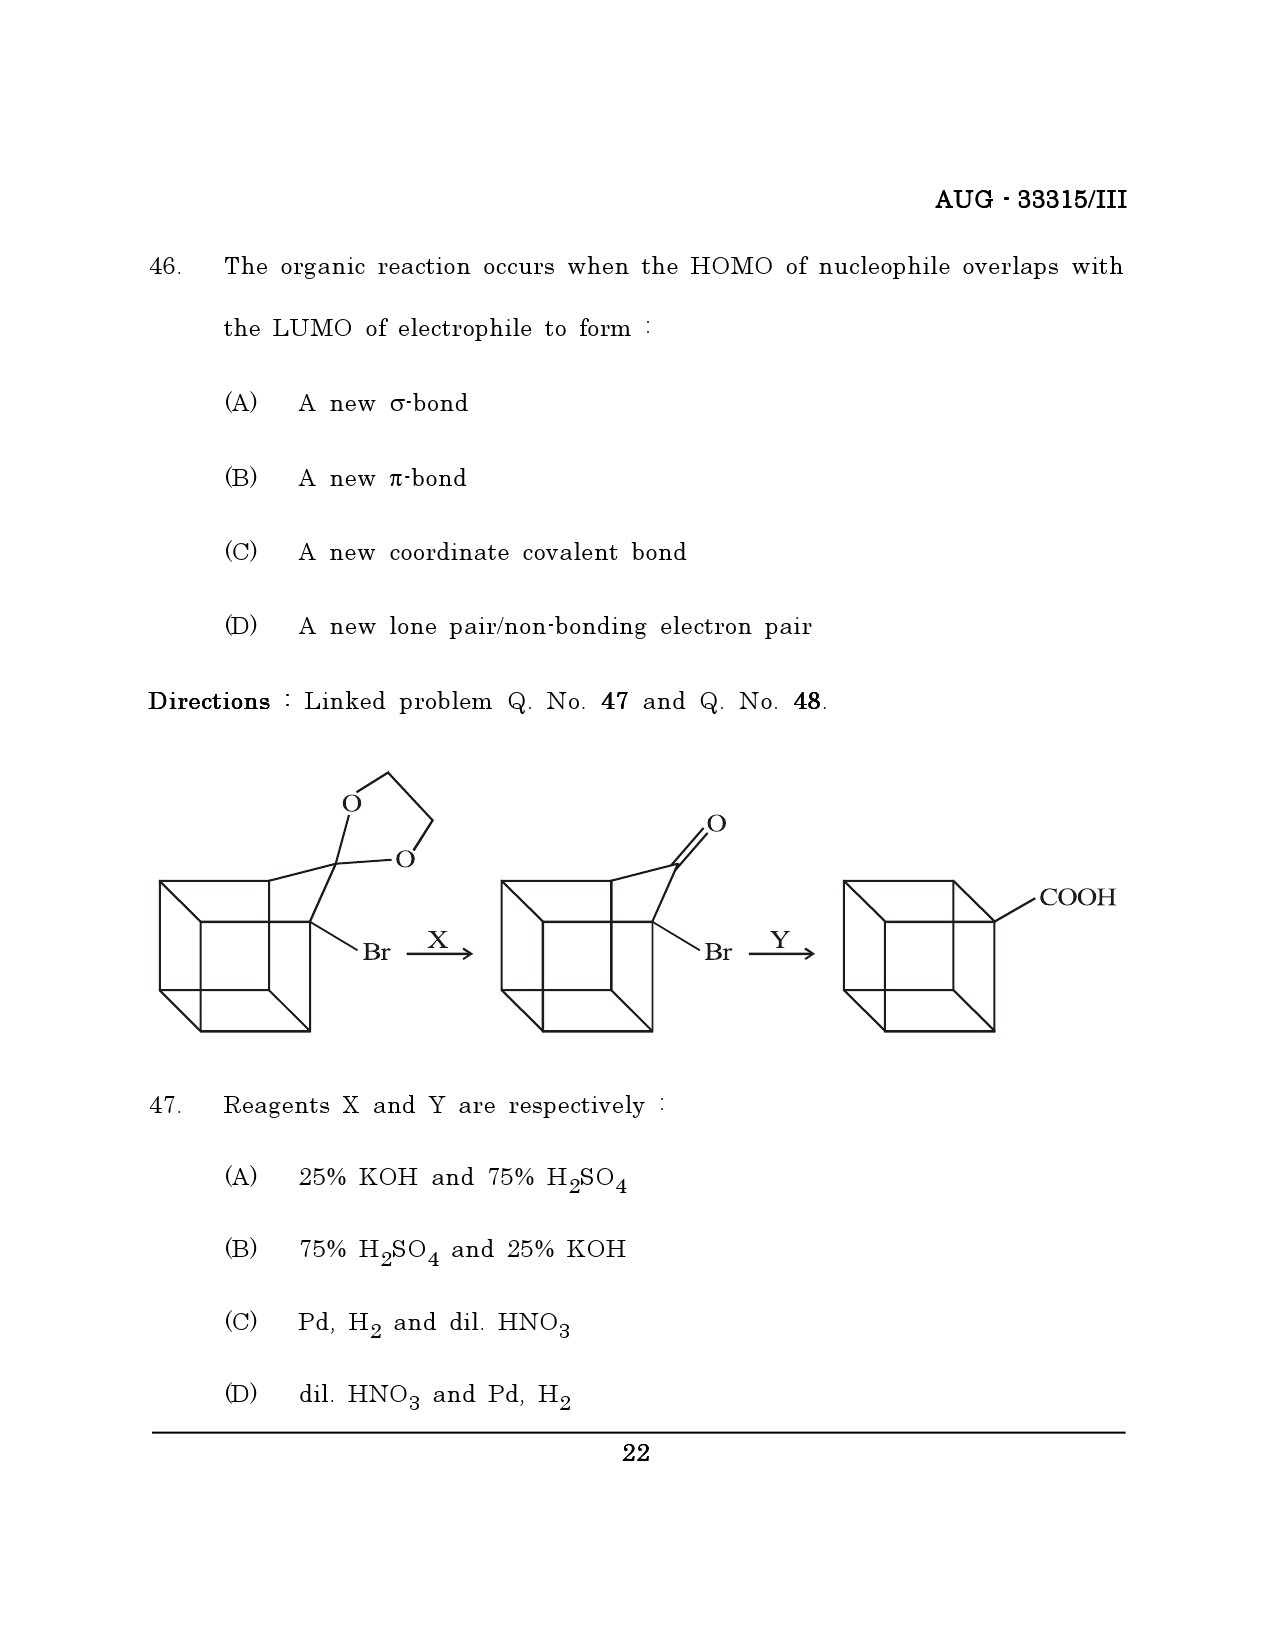 Maharashtra SET Chemical Sciences Question Paper III August 2015 21